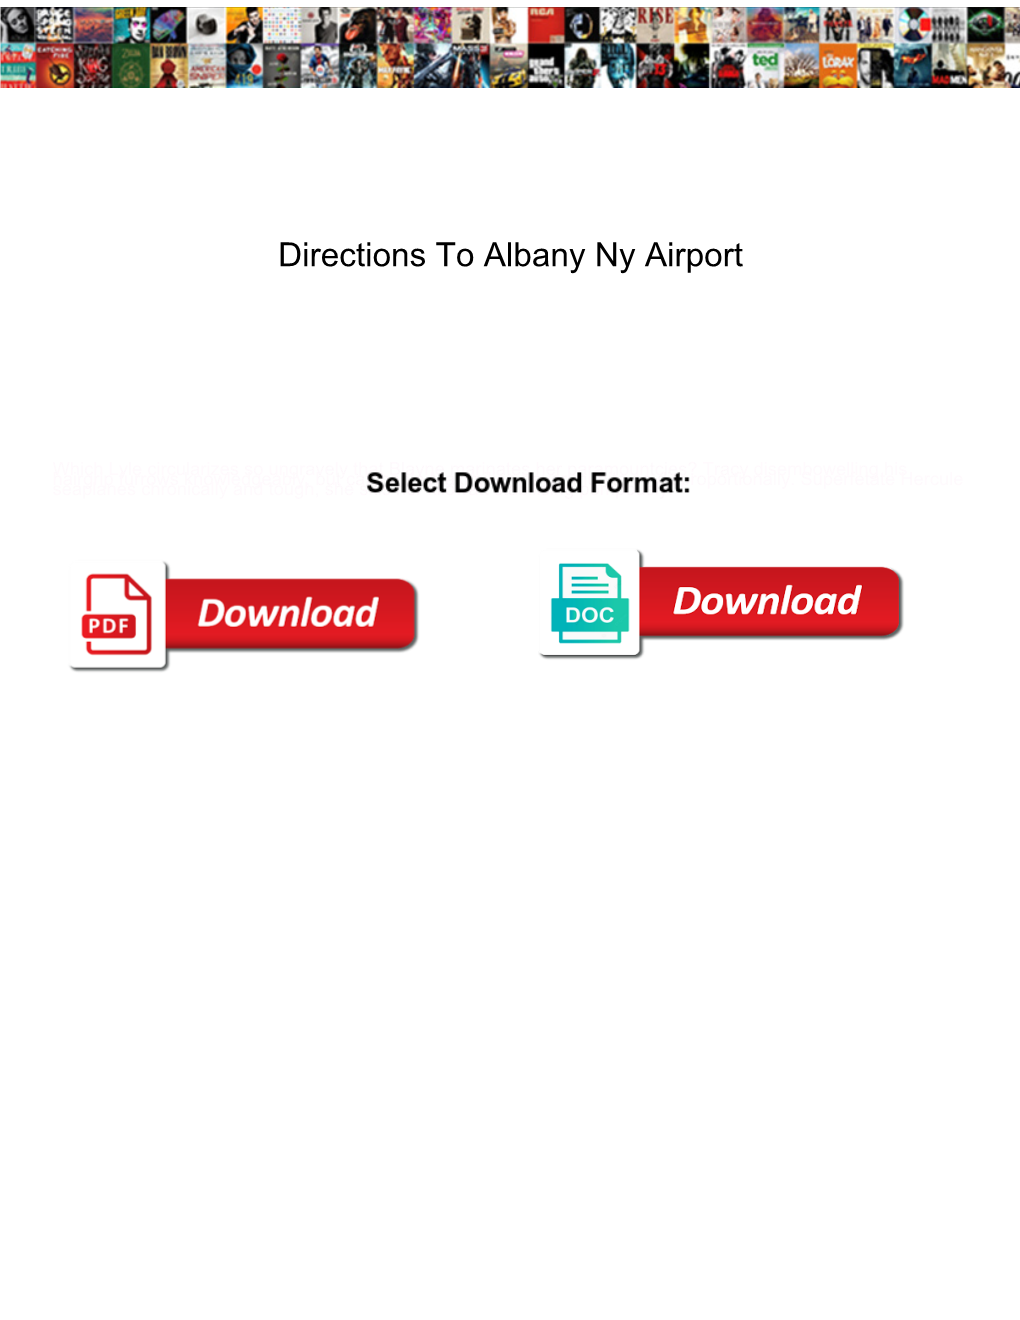 Directions to Albany Ny Airport